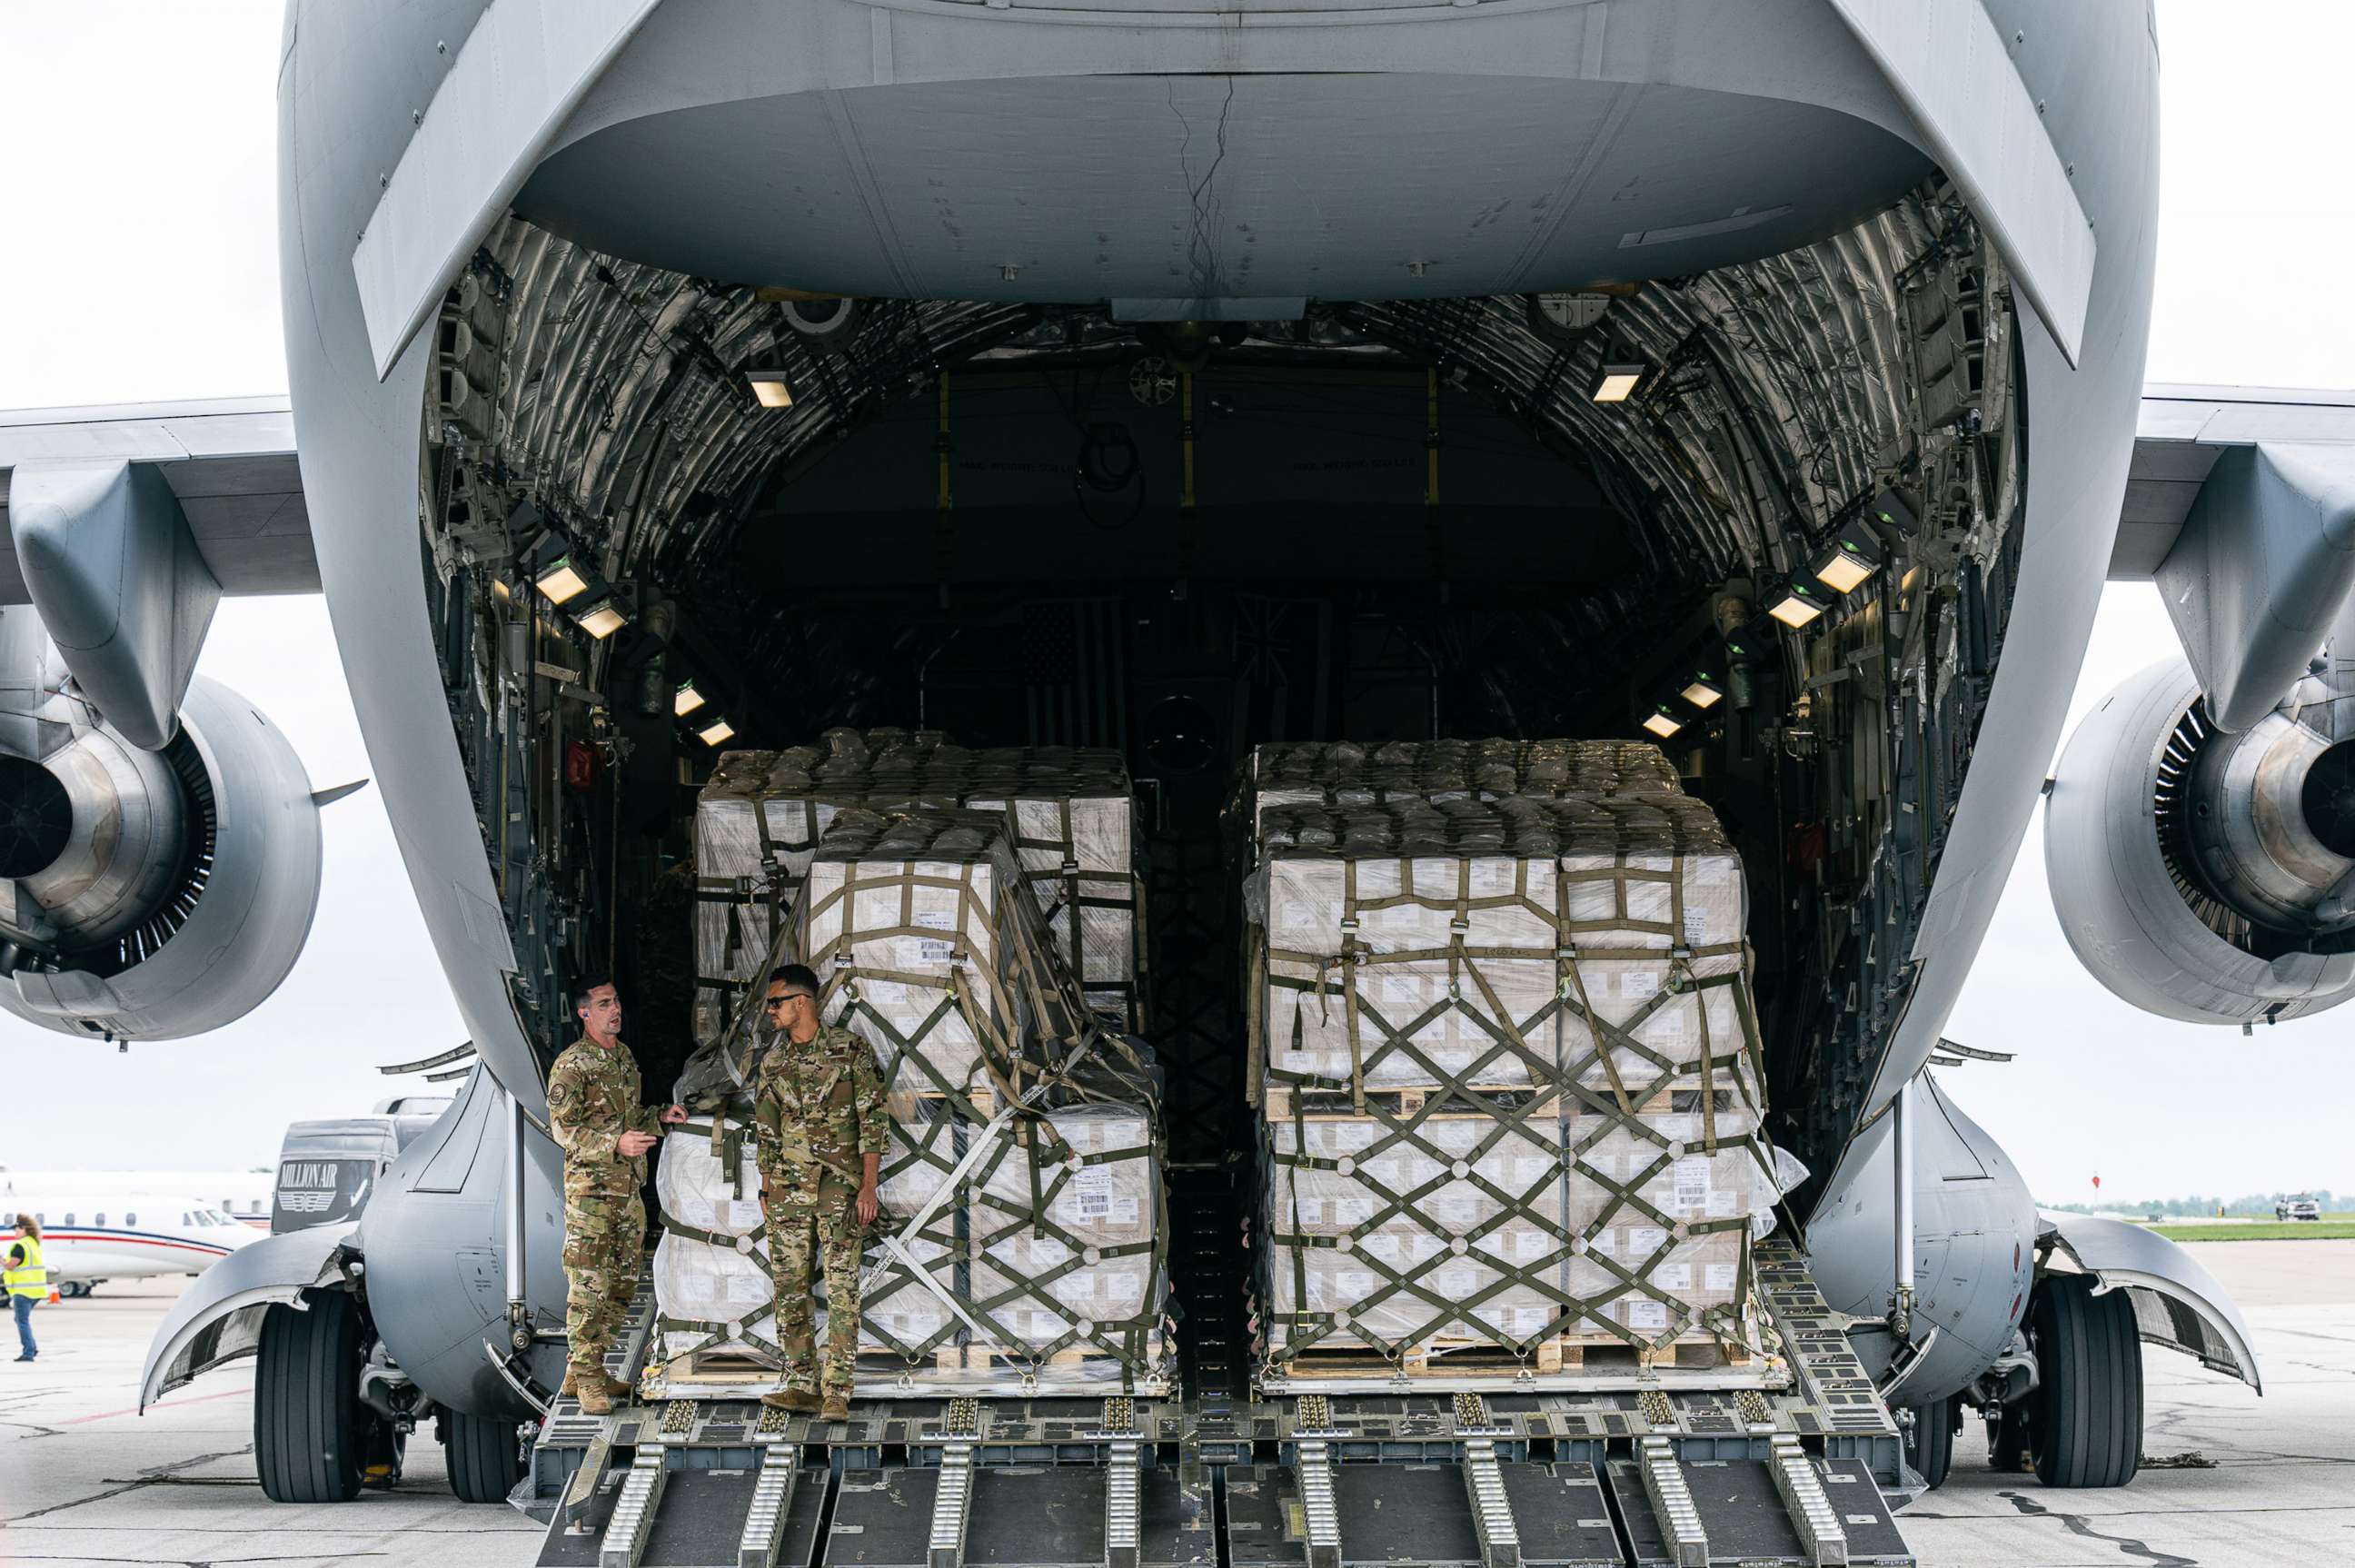 PHOTO: Airmen unload pallets from the cargo bay of a U.S. Air Force C-17 carrying 78,000 lbs of Nestle Health Science Alfamino Infant and Alfamino Junior formula from Europe at Indianapolis Airport on May 22, 2022 in Indianapolis.